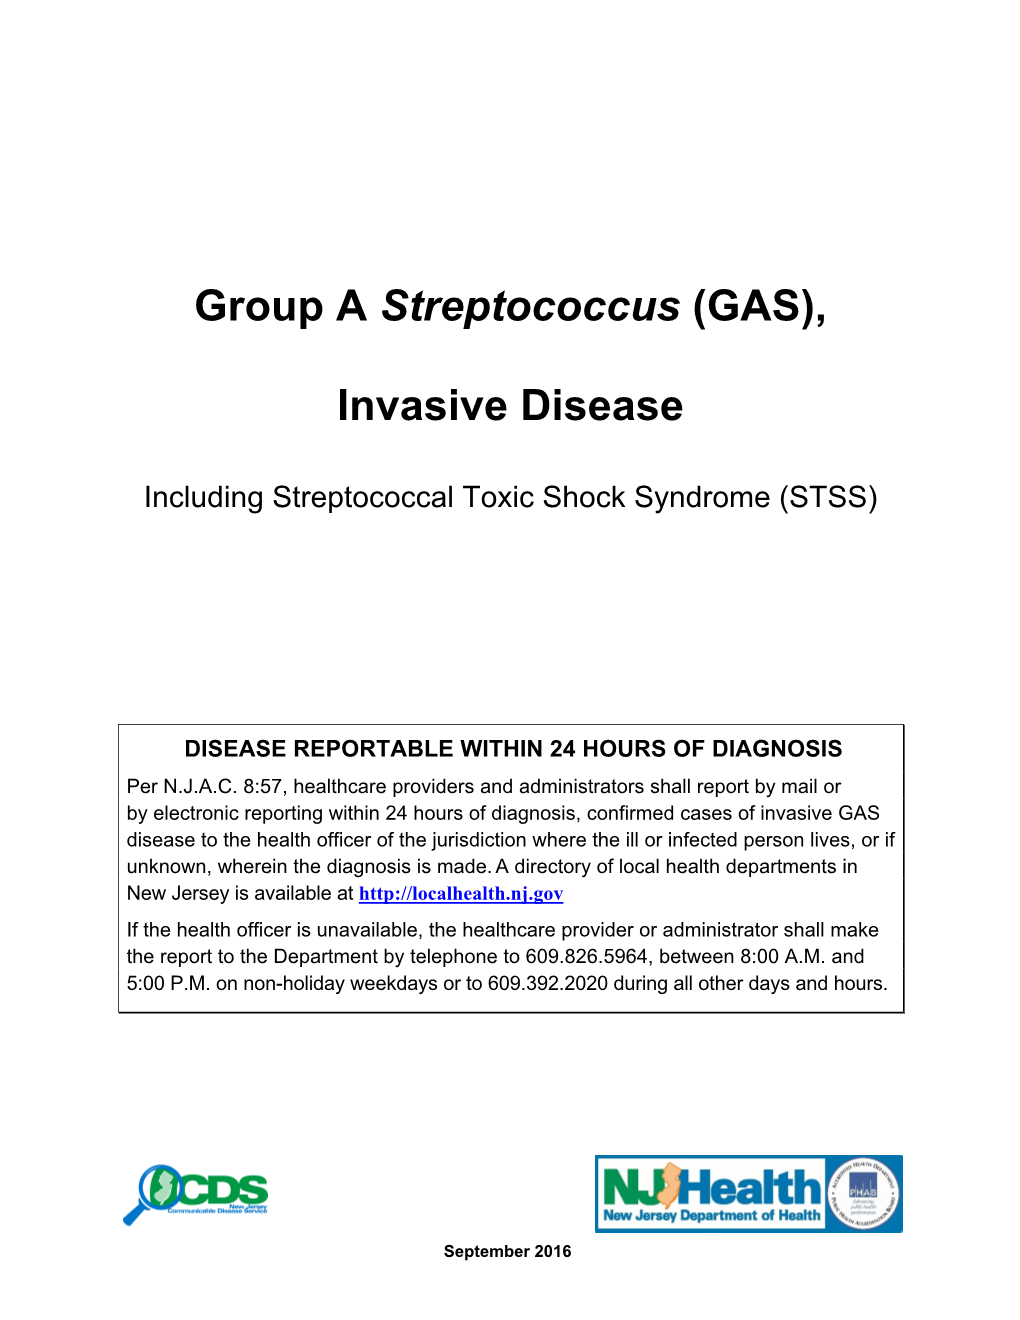 Group a Streptococcus (GAS)